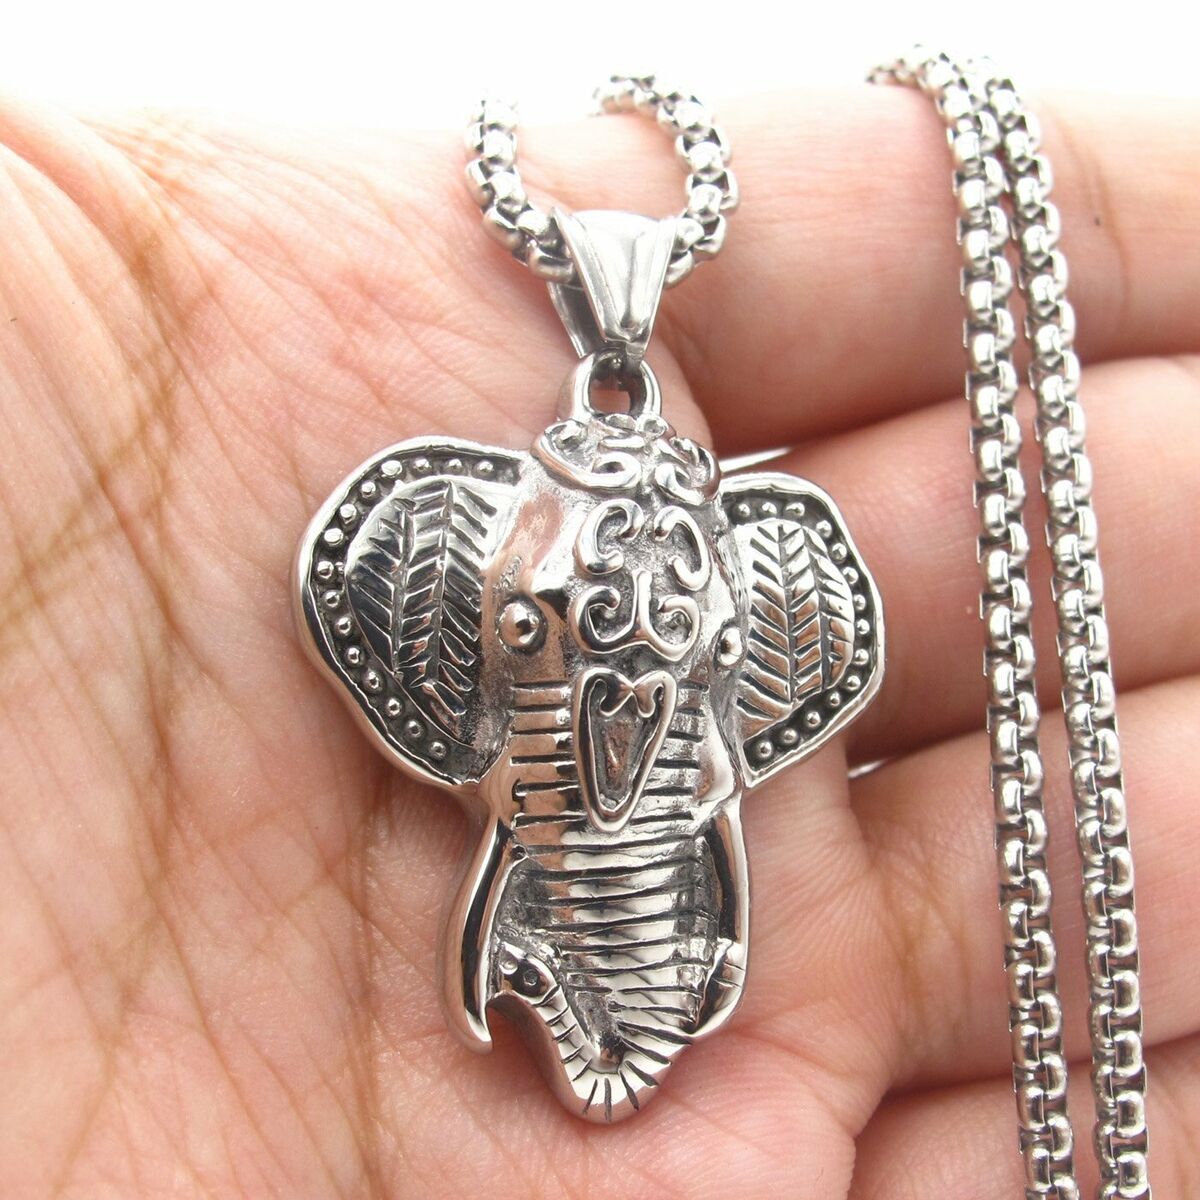 MENDEL Stainless Steel Lucky Elephant Head Charm Necklace Silver | eBay